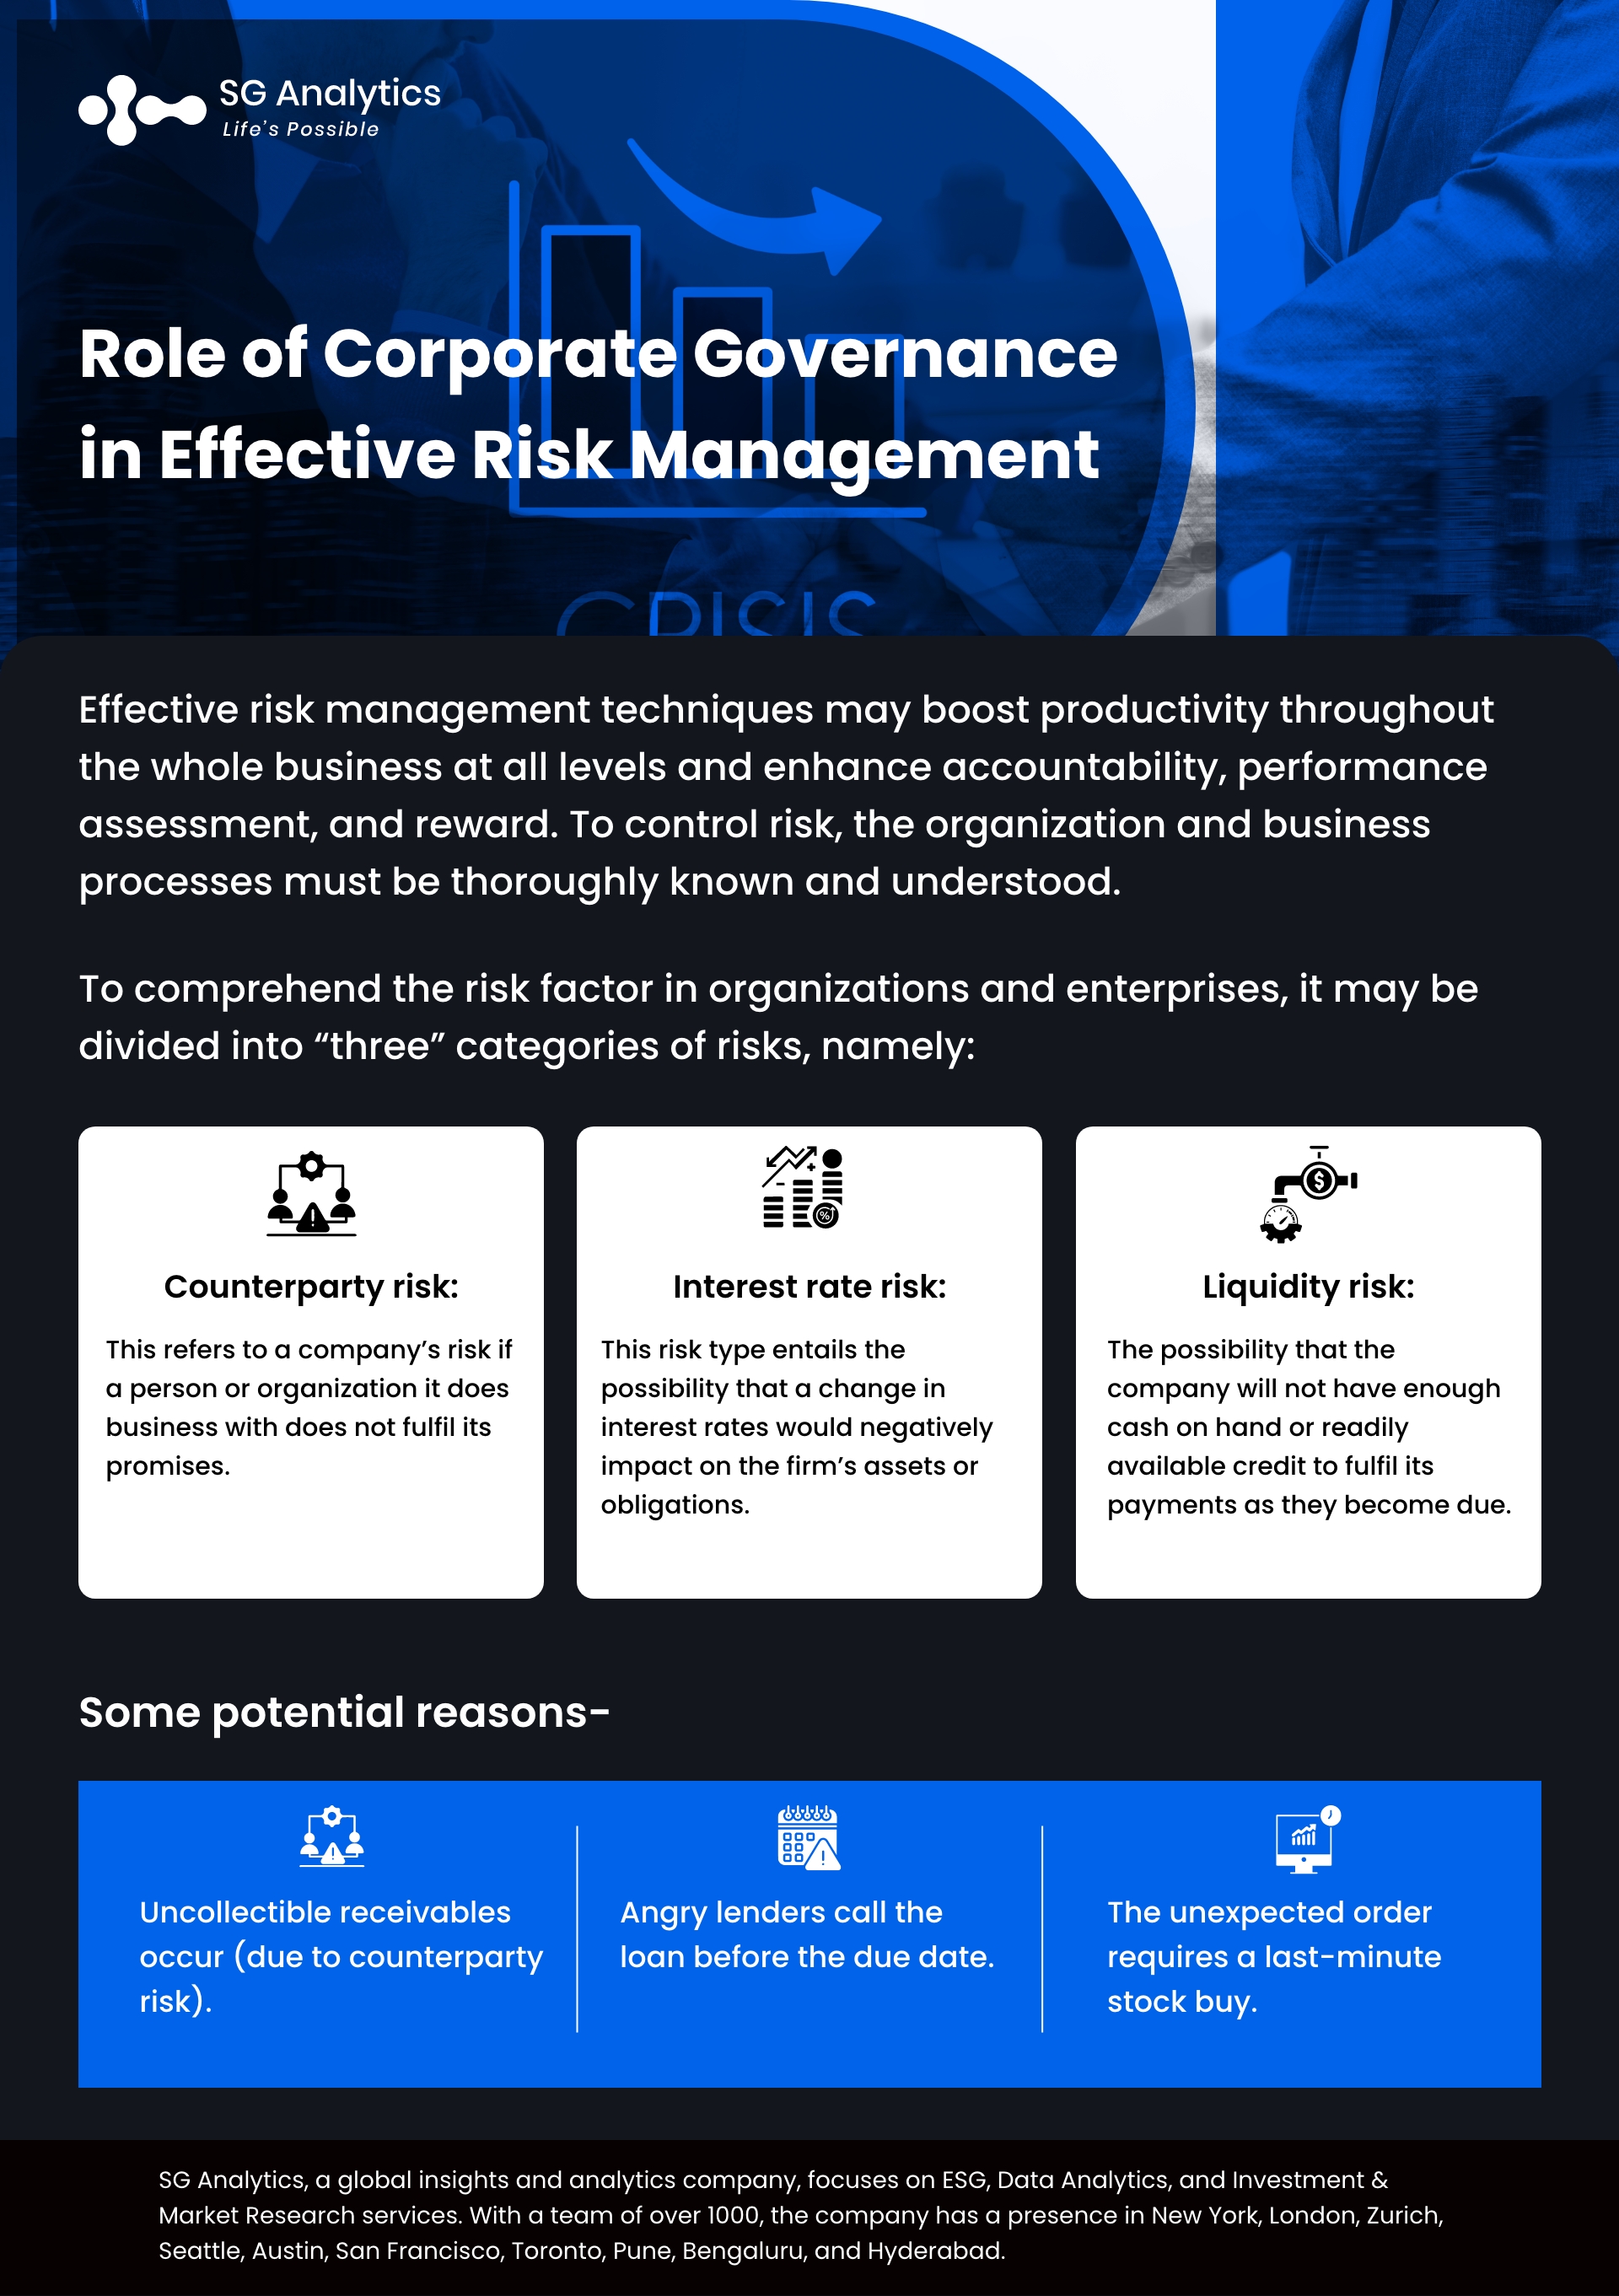 Role of Corporate Governance in Effective Risk Management